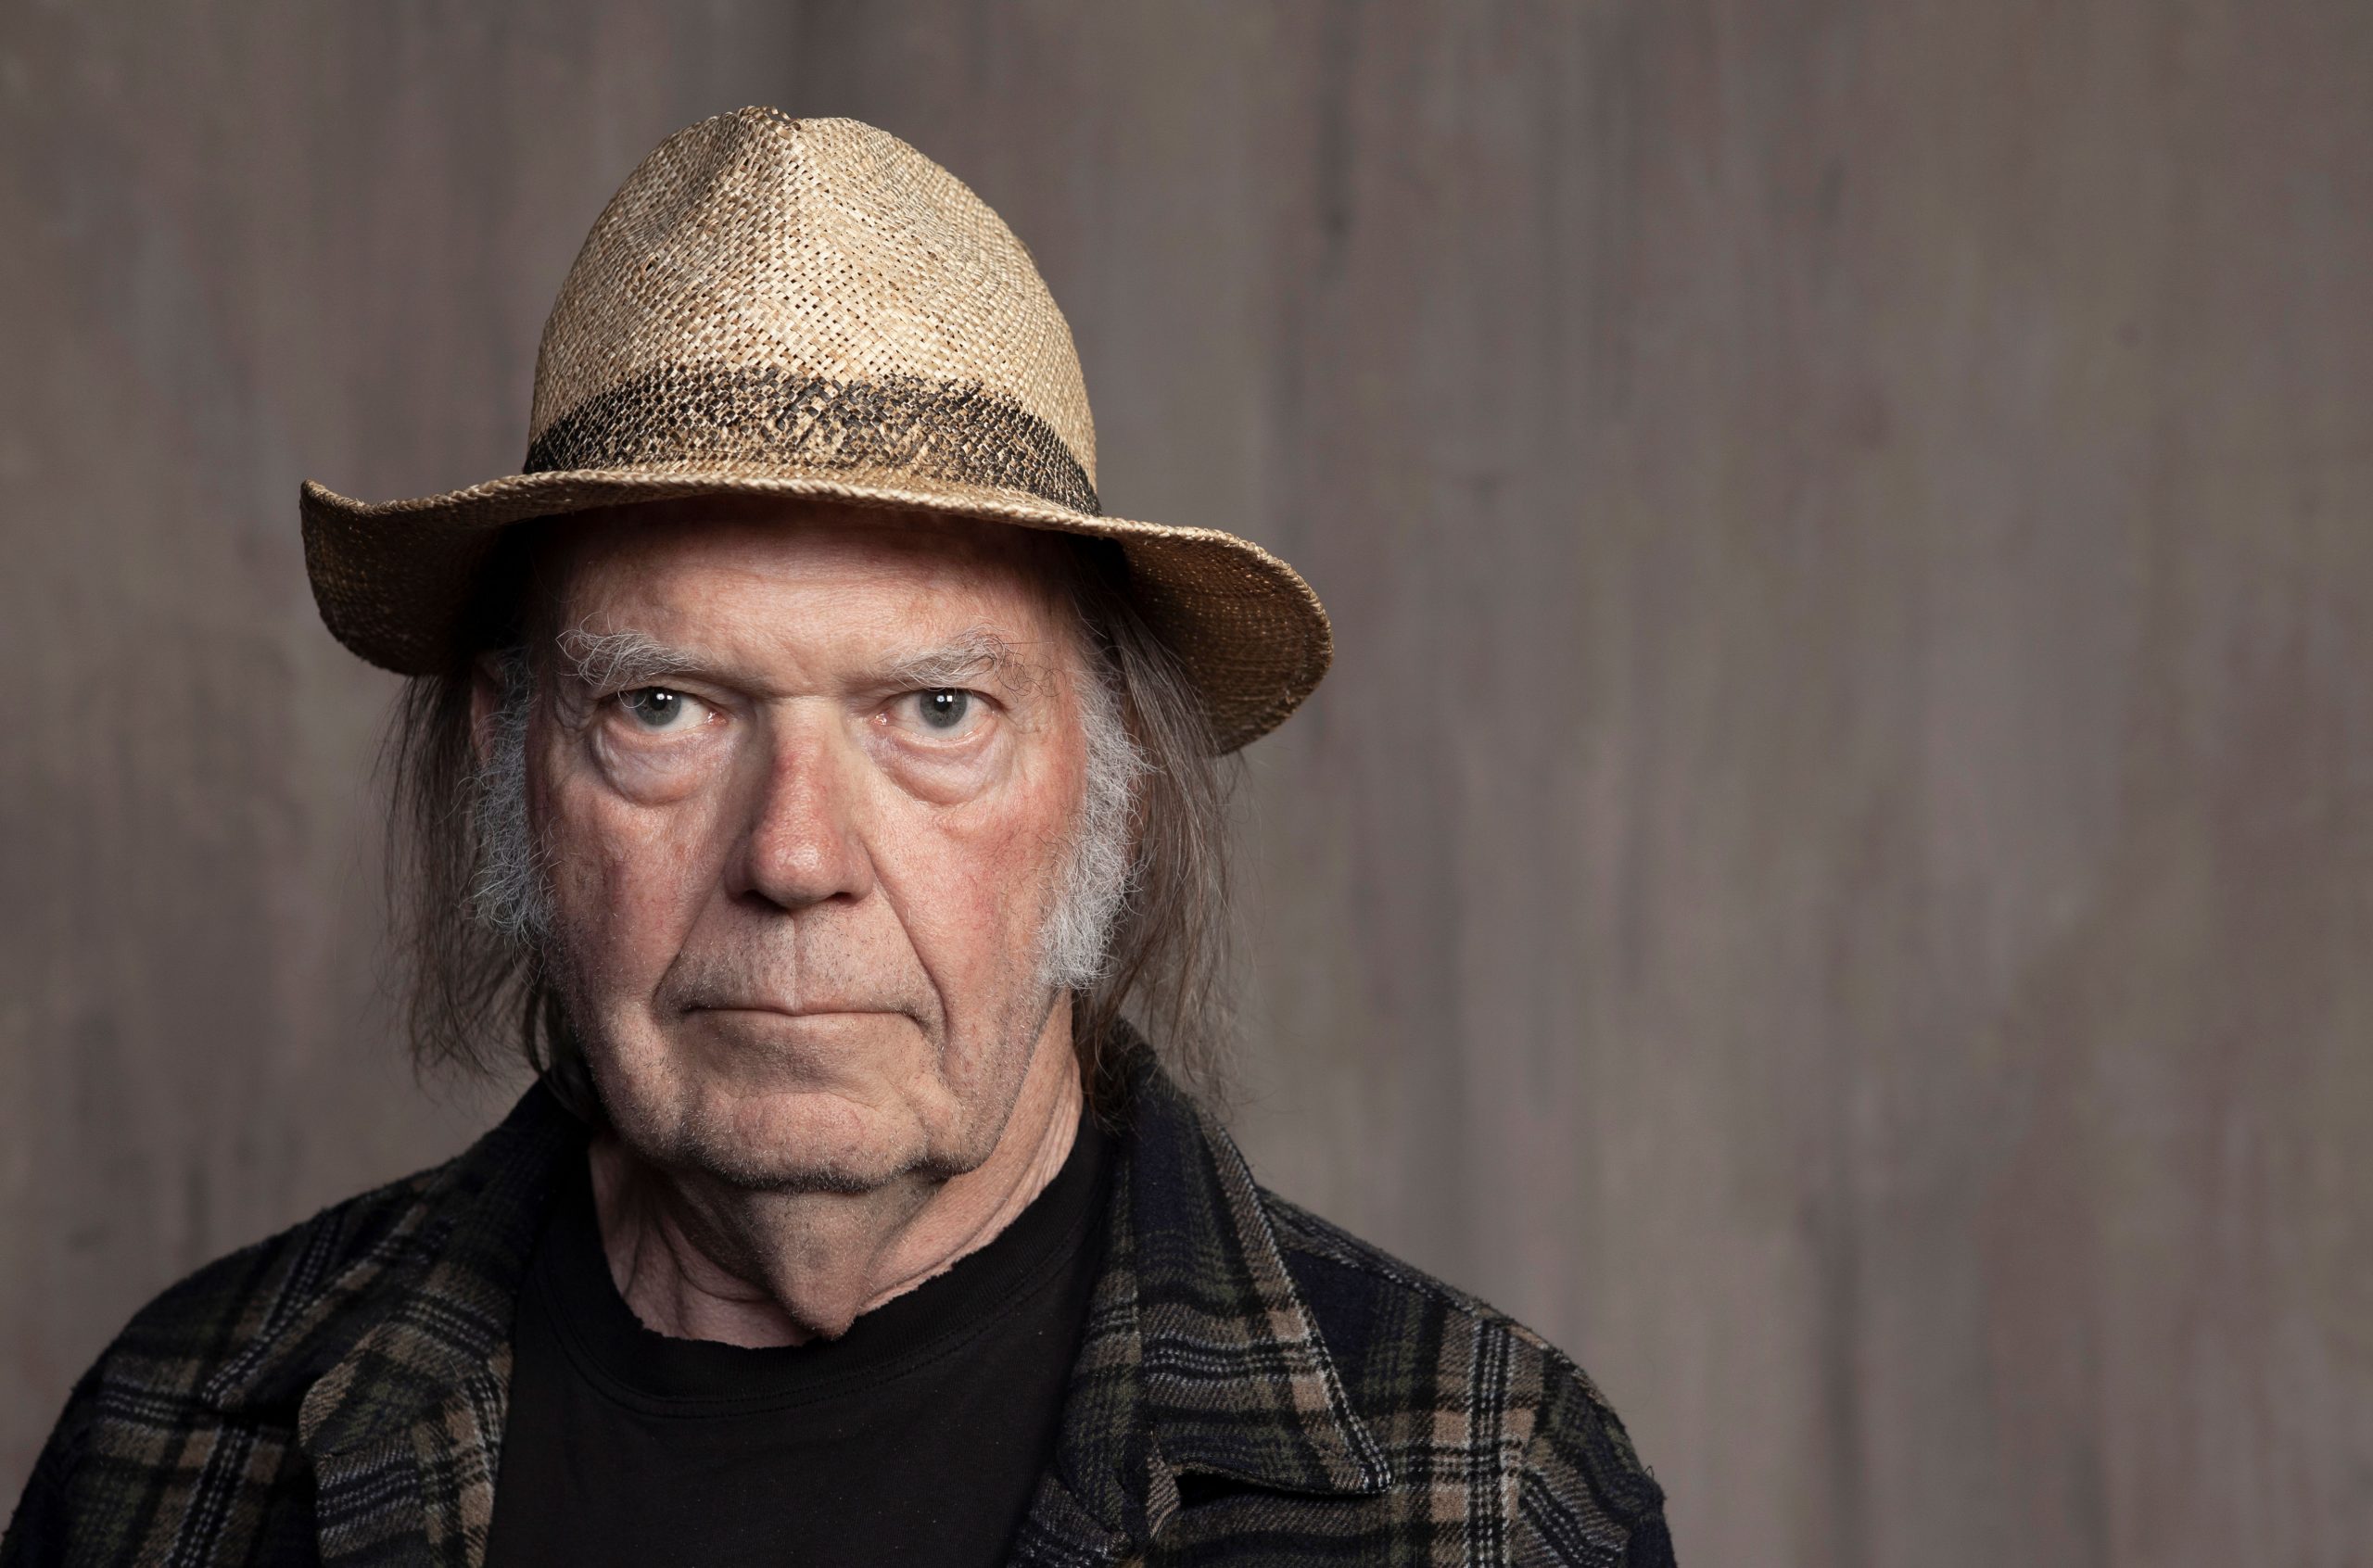 Who is Neil Young?